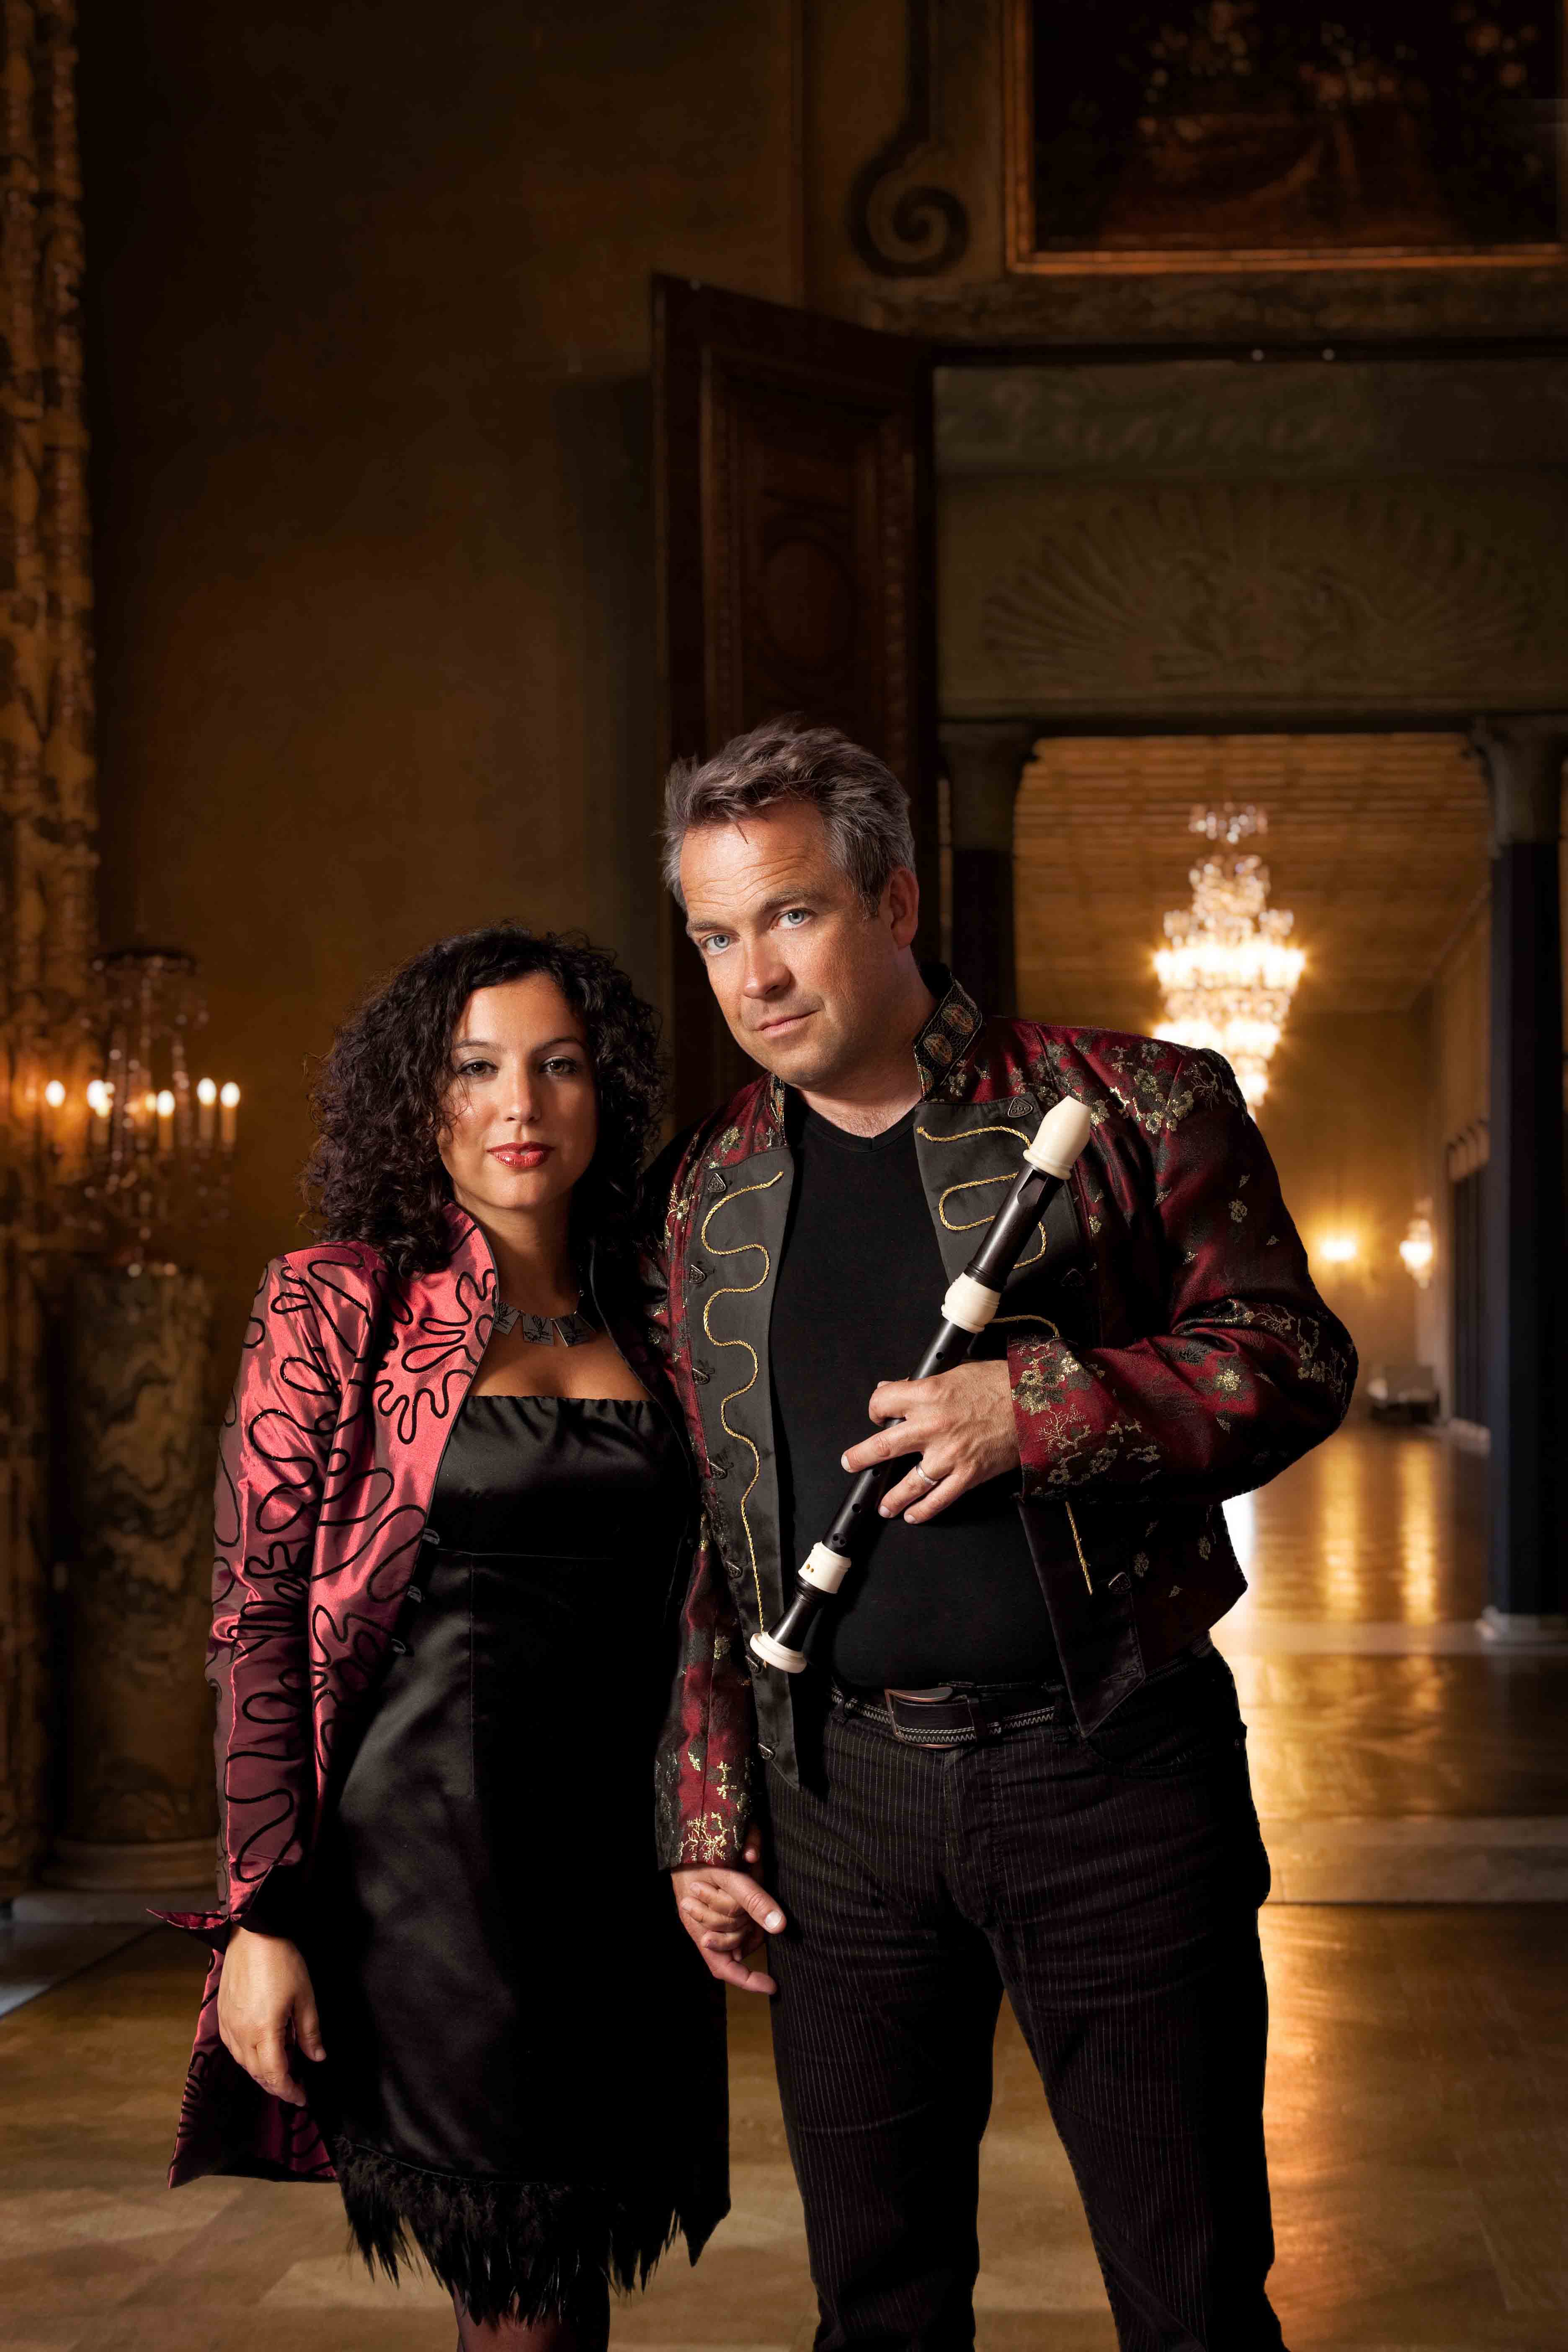 Virtuoso Swedish recorder player, Dan Laurin with harpsichordist Anna Paradiso will be performing a mixed programme of Swedish baroque music